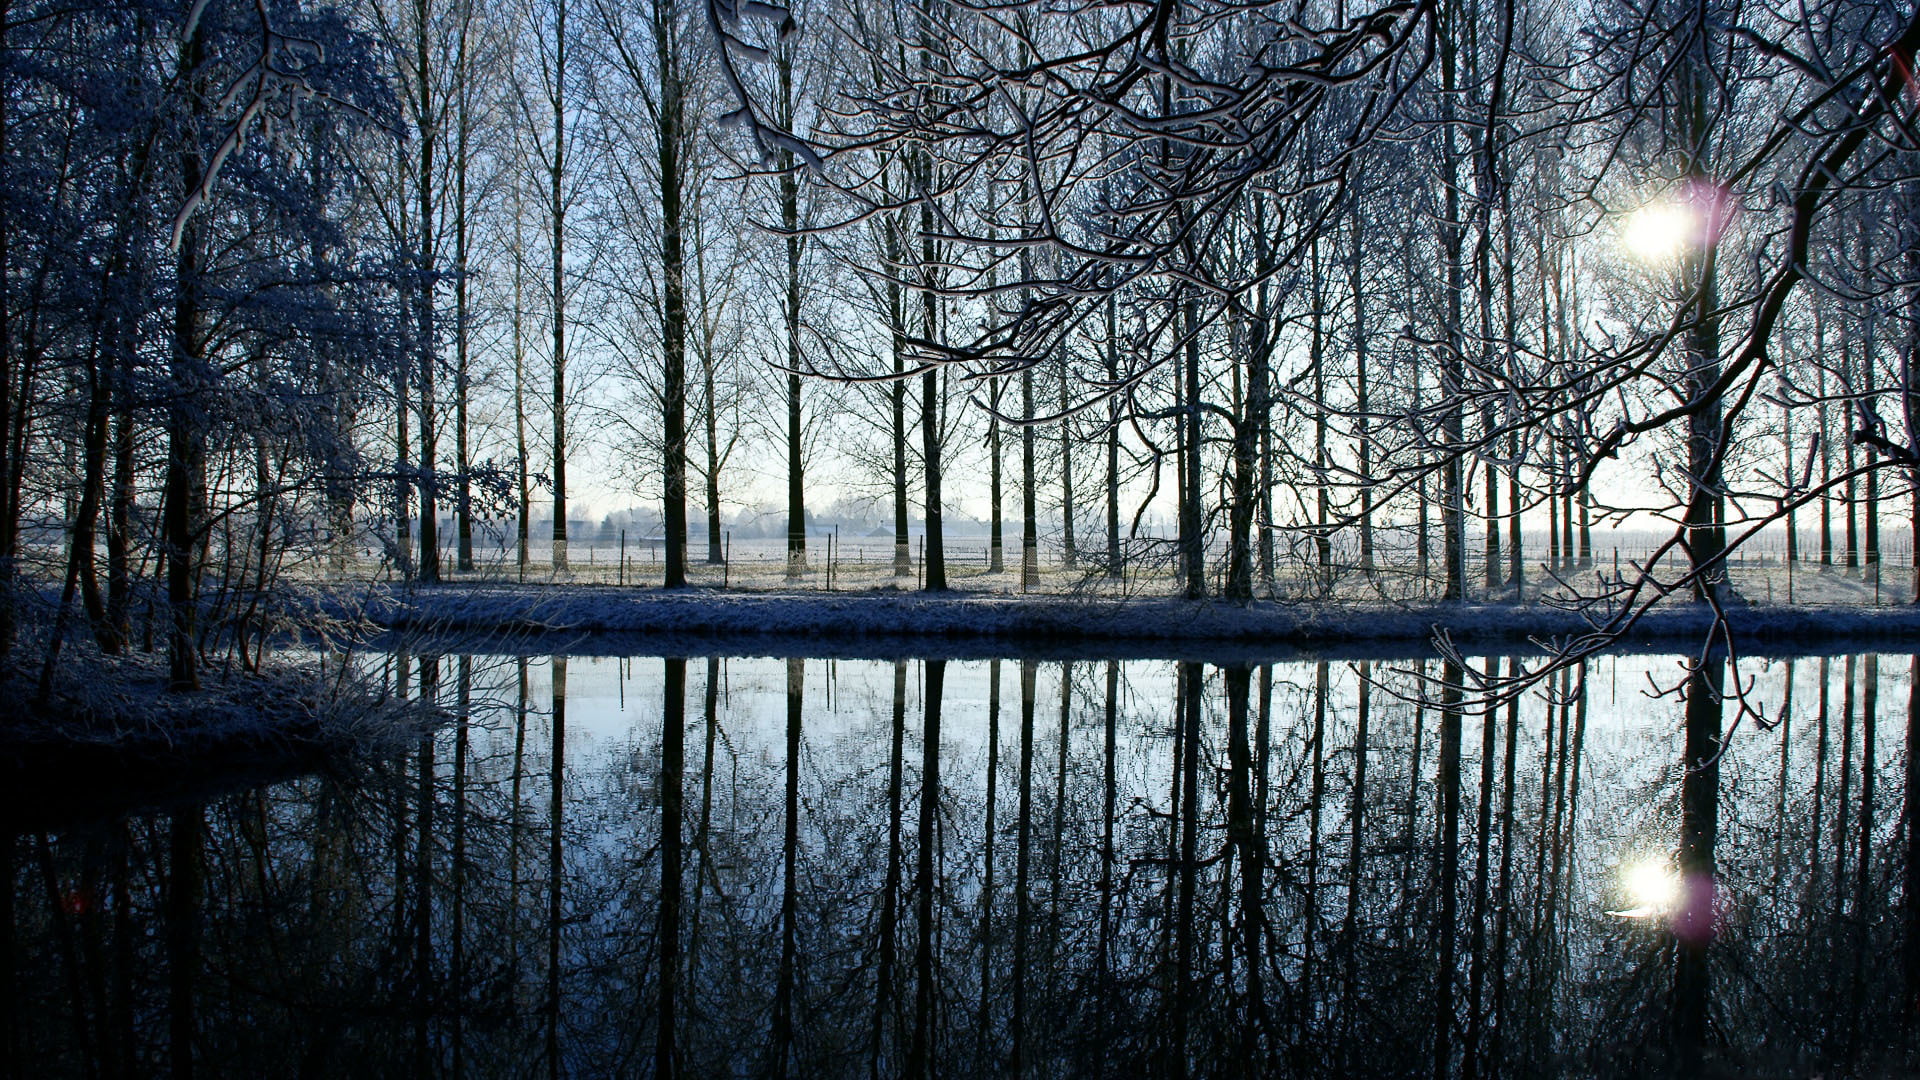 trees in front of body of water during day time